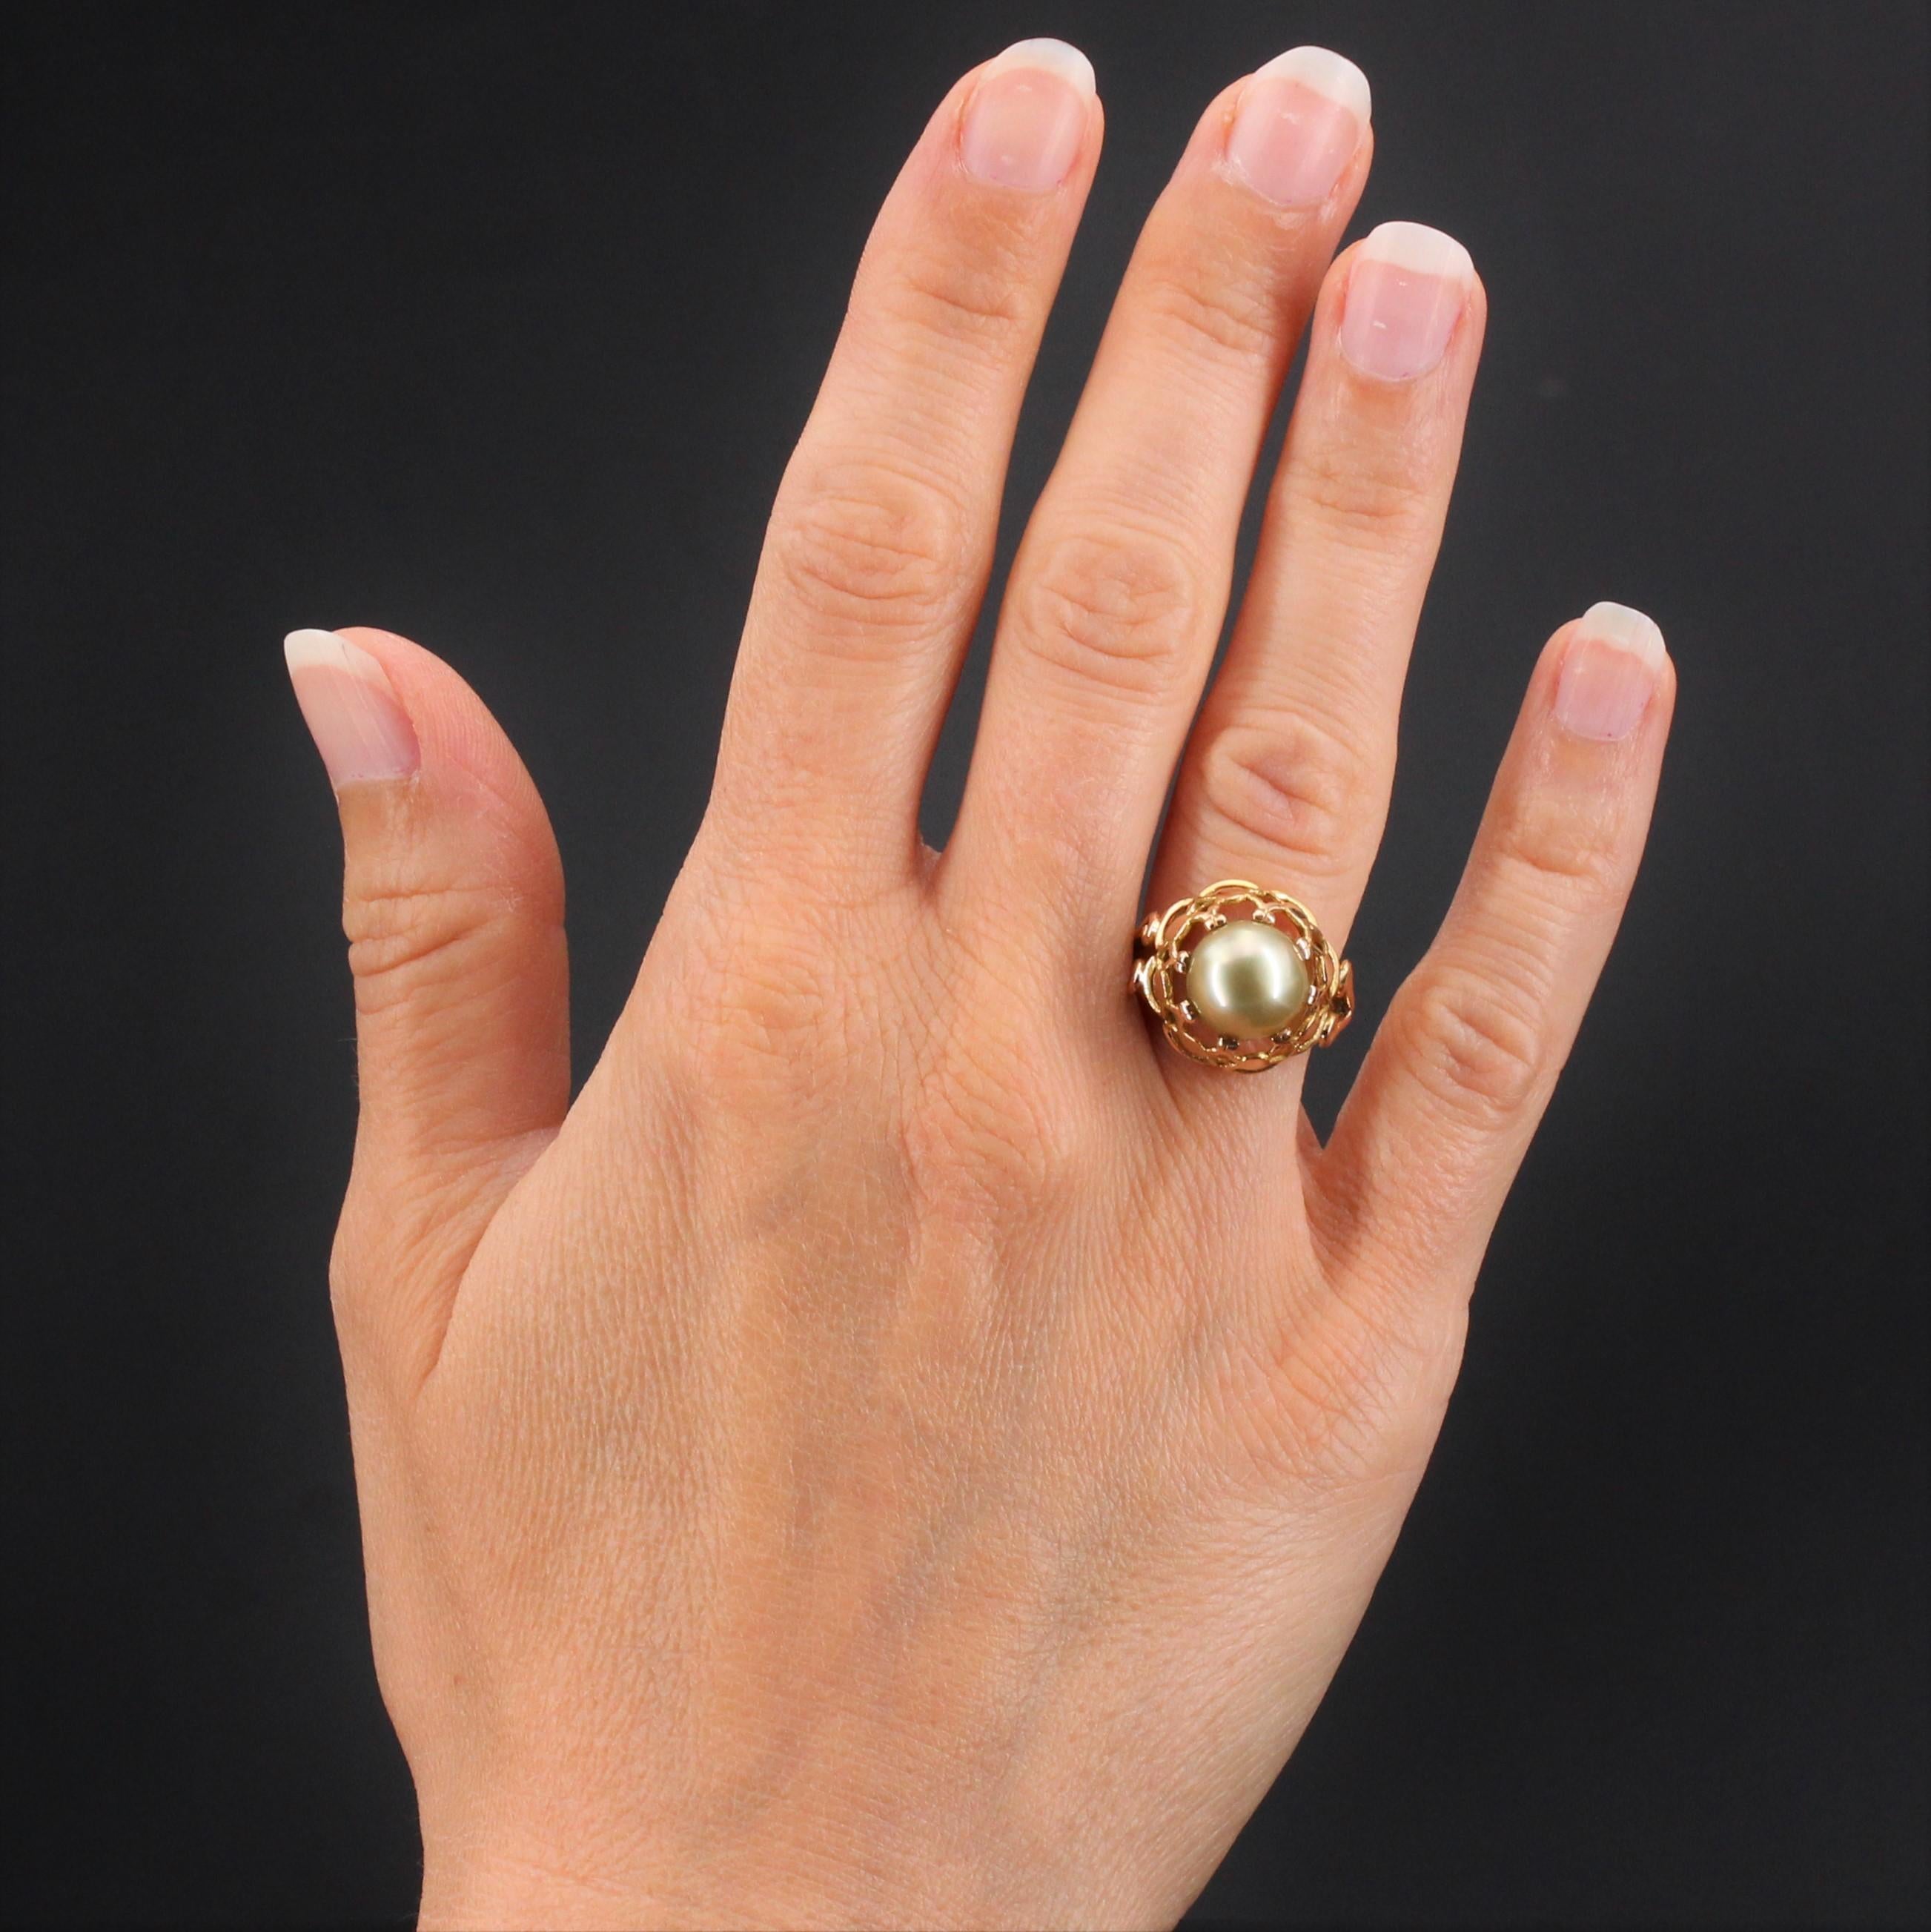 Ring in 18 karat yellow gold, eagle head hallmark.
Original retro ring, the claws of its setting hold on its top a round pearl in the gray bronze orientation. The ring is openworked.
Diameter of the pearl : 9.5/10 mm.
Height : 15,5 mm, width : 16 mm